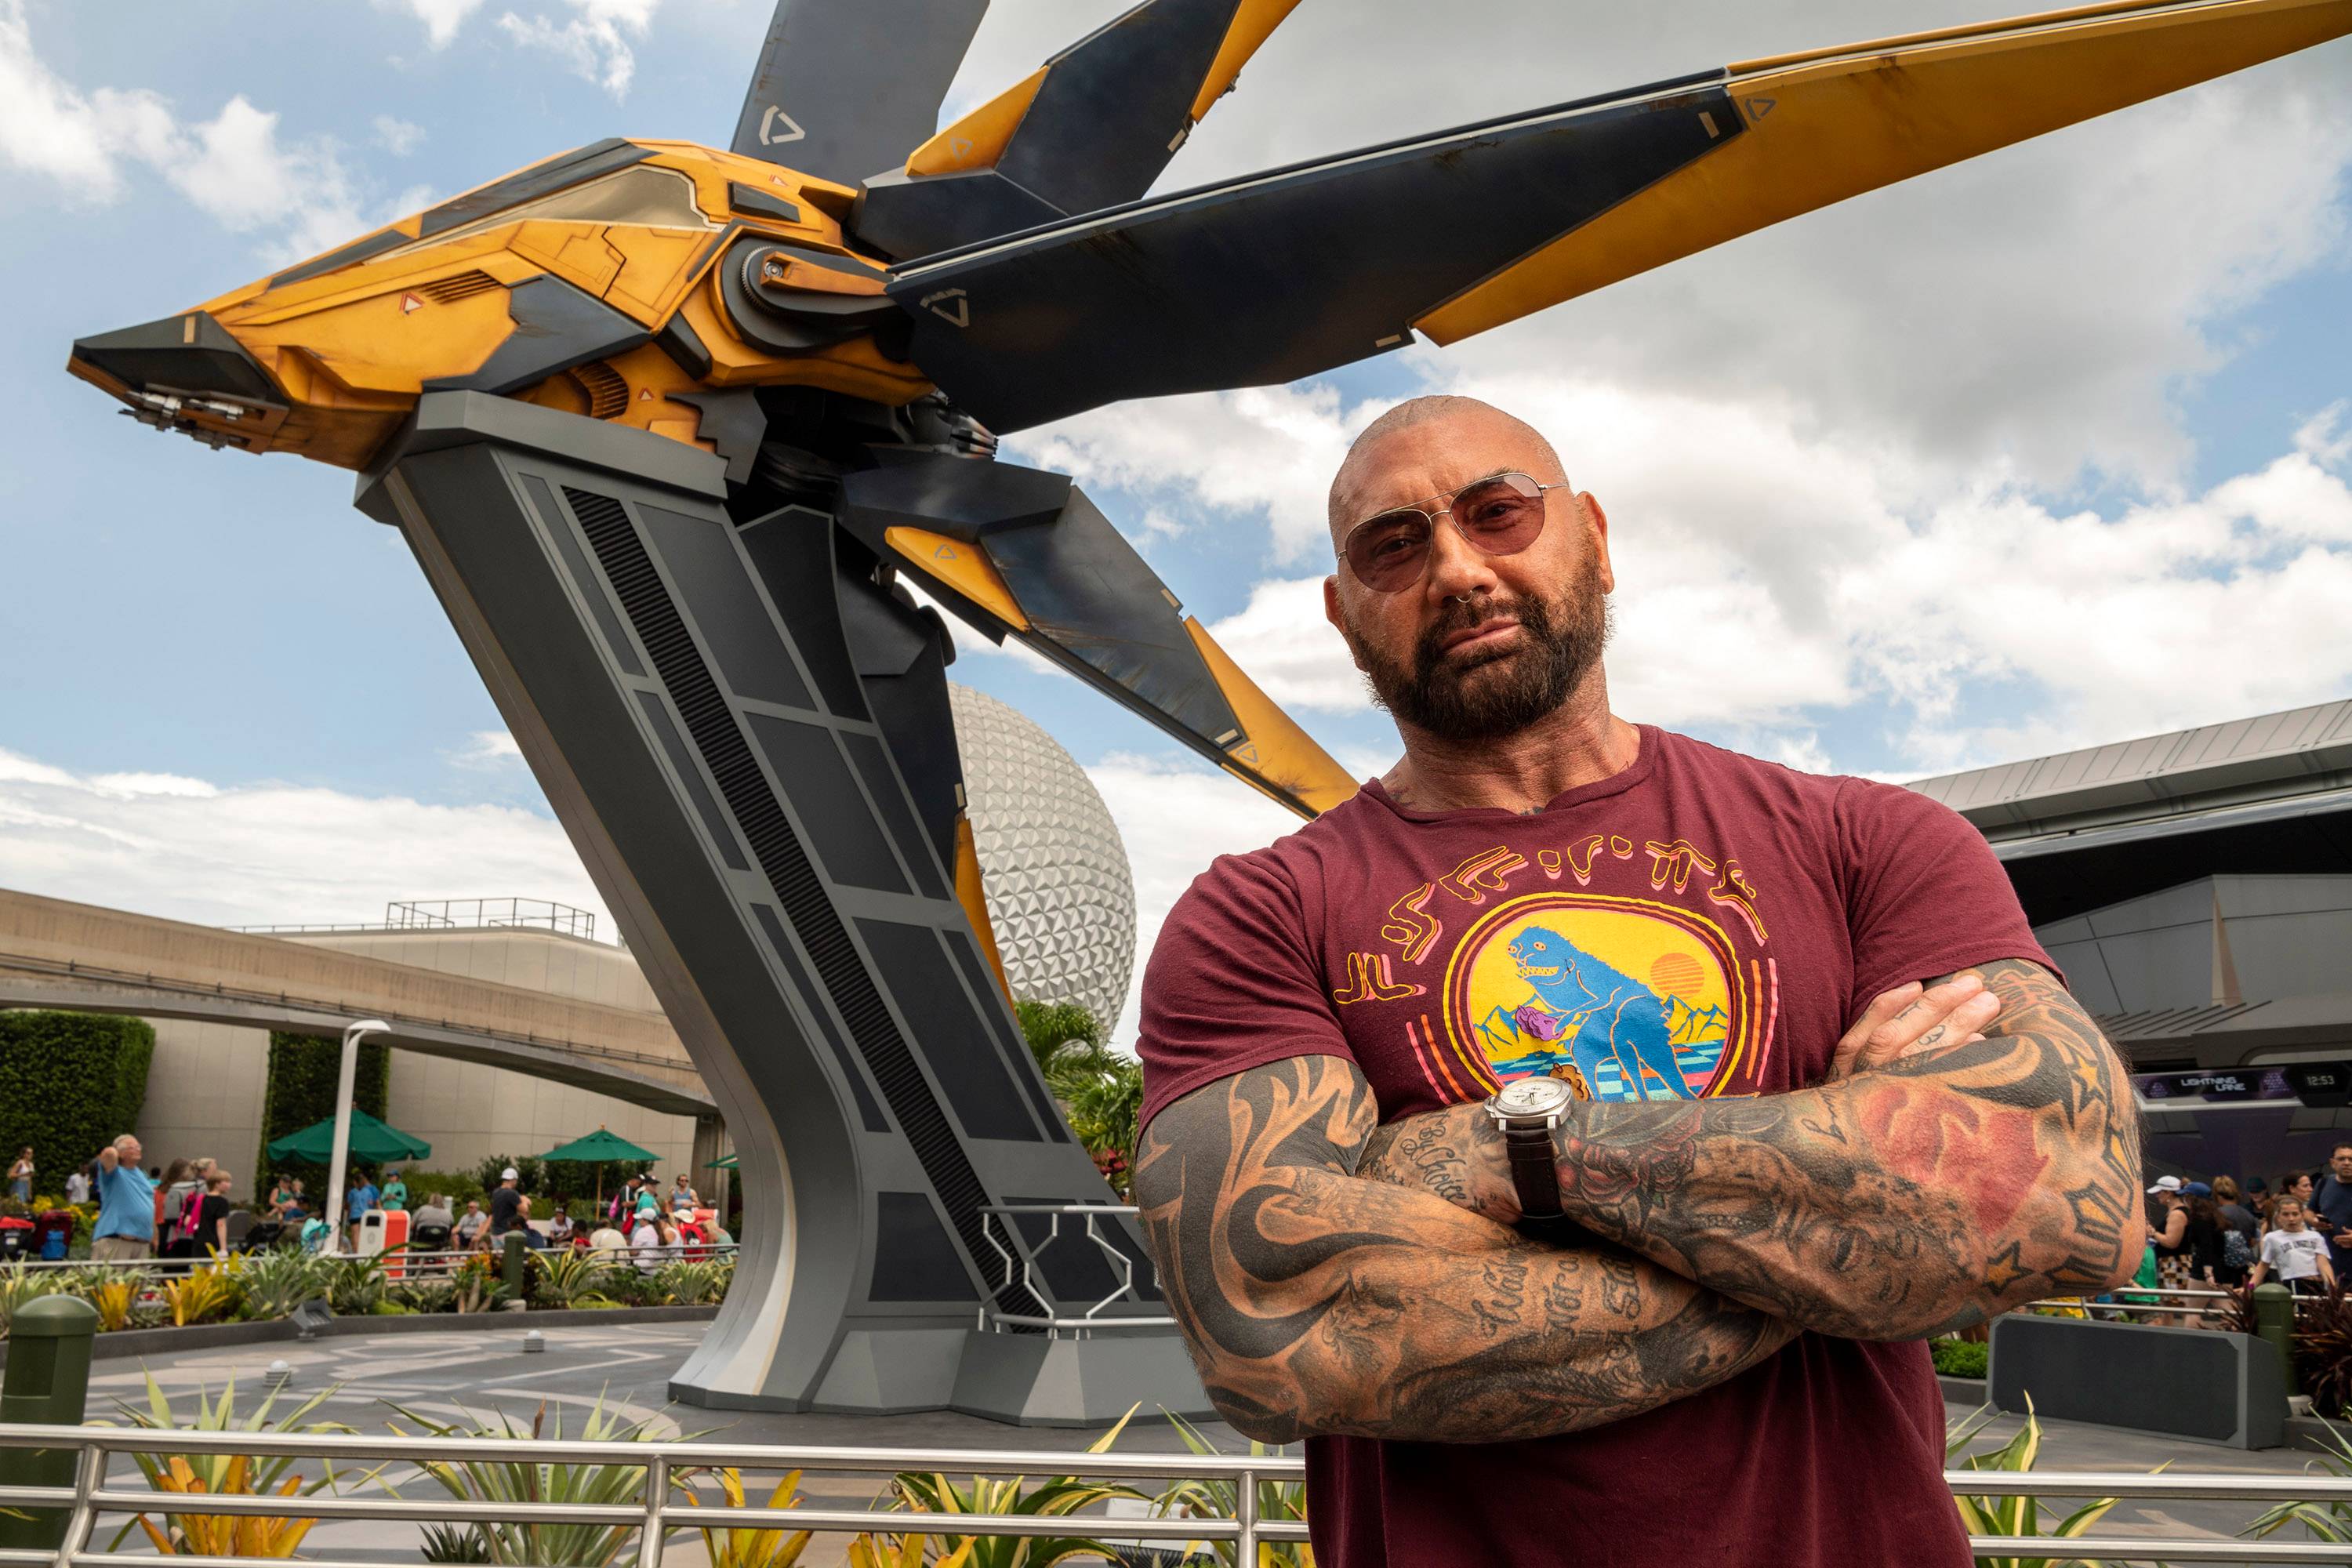 Dave Bautista might not return to 'Guardians of the Galaxy